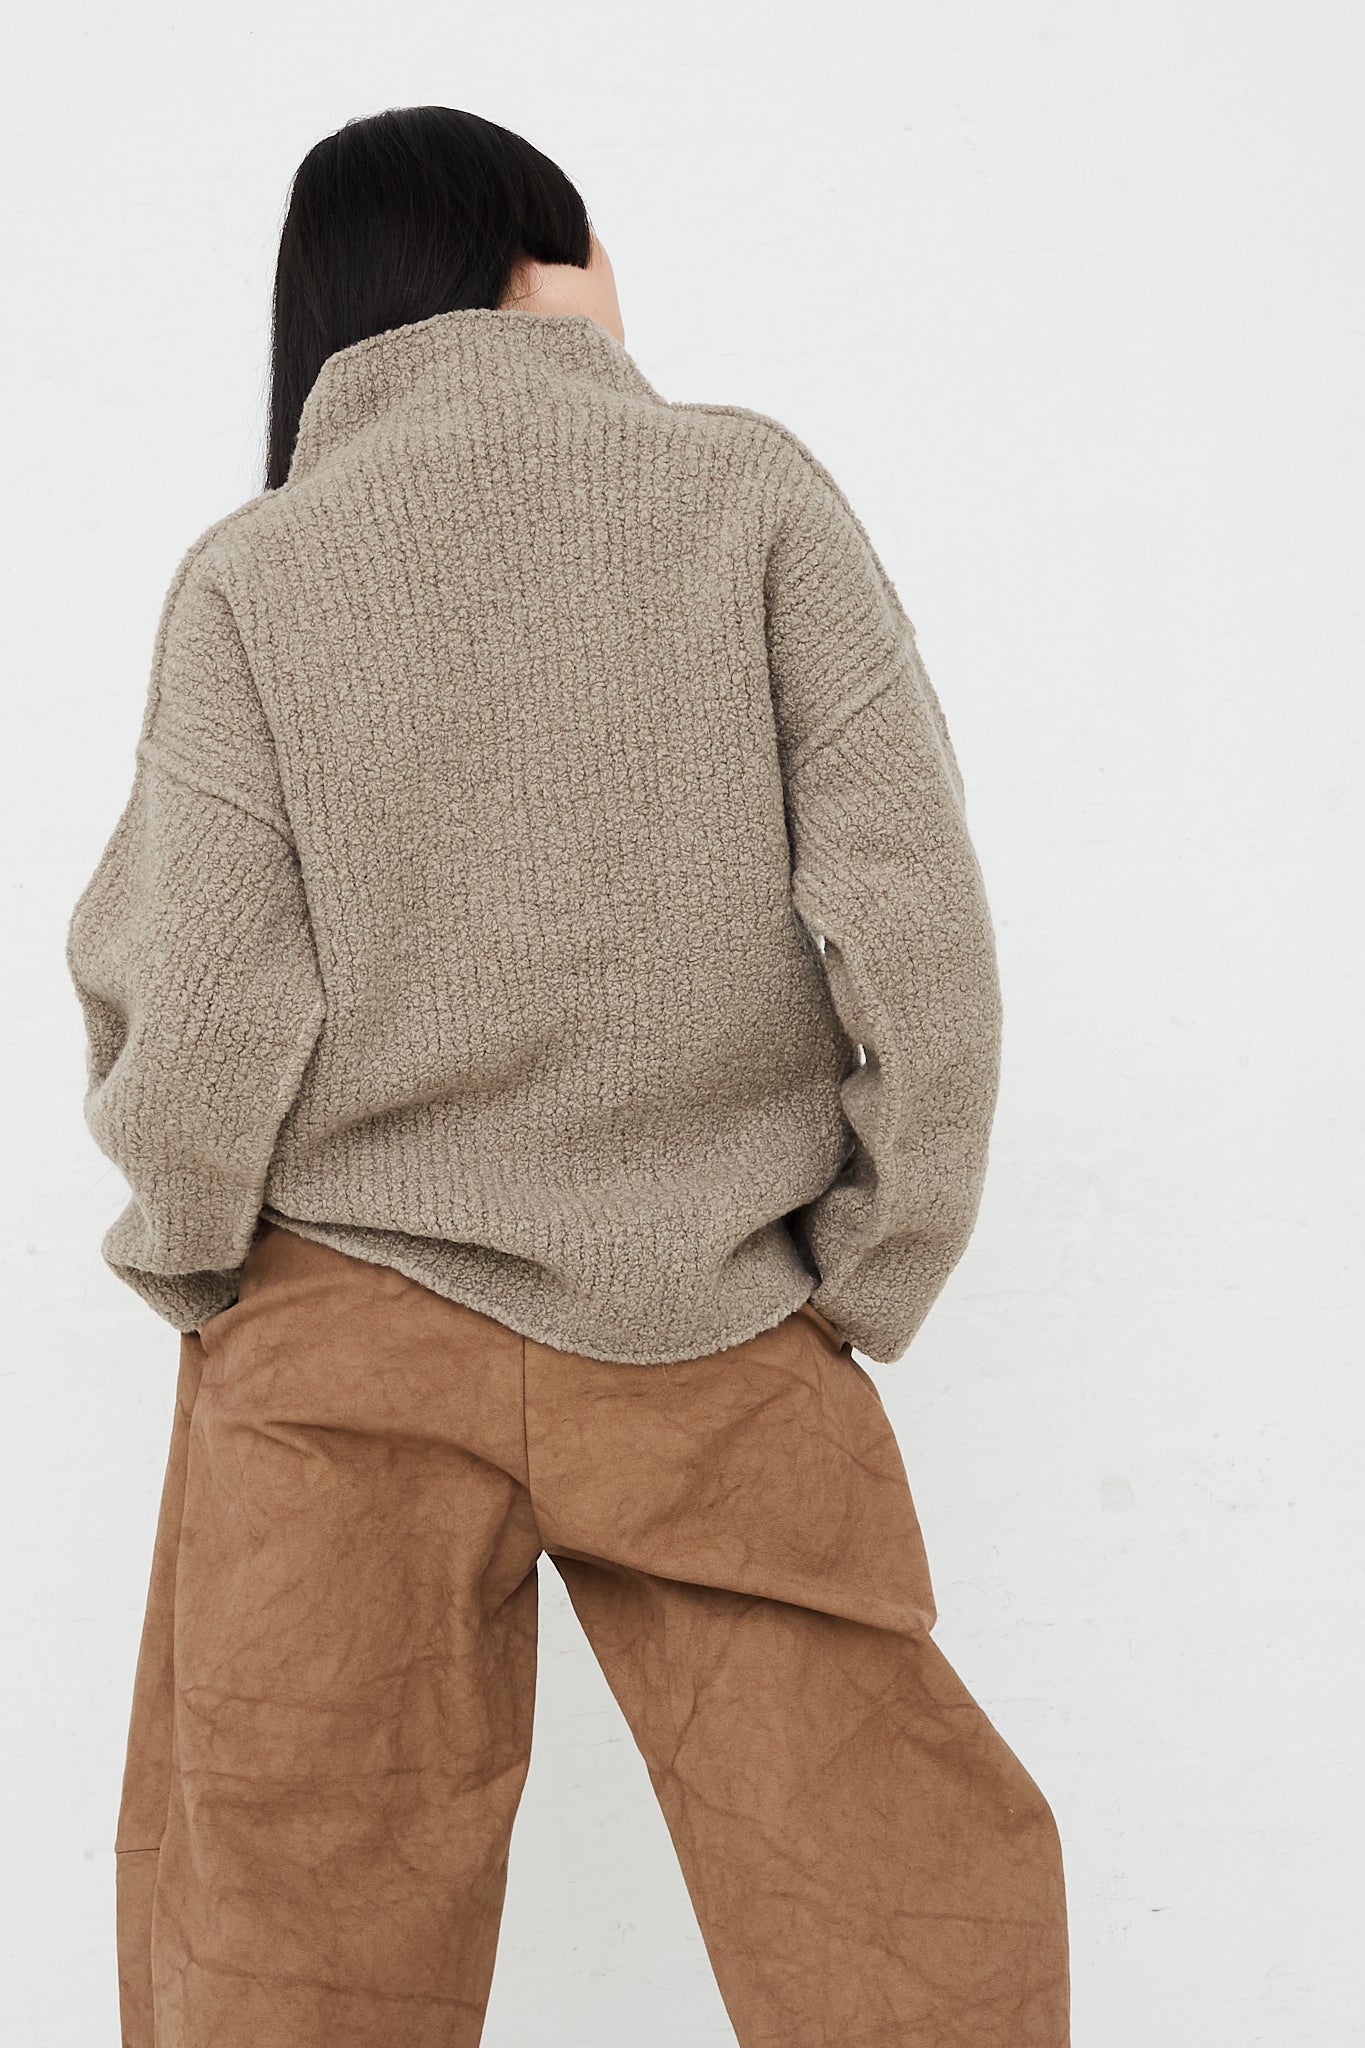 Taupe Turtleneck Sweater in Merino Boucle Wool by Lauren Manoogian for Oroboro Back